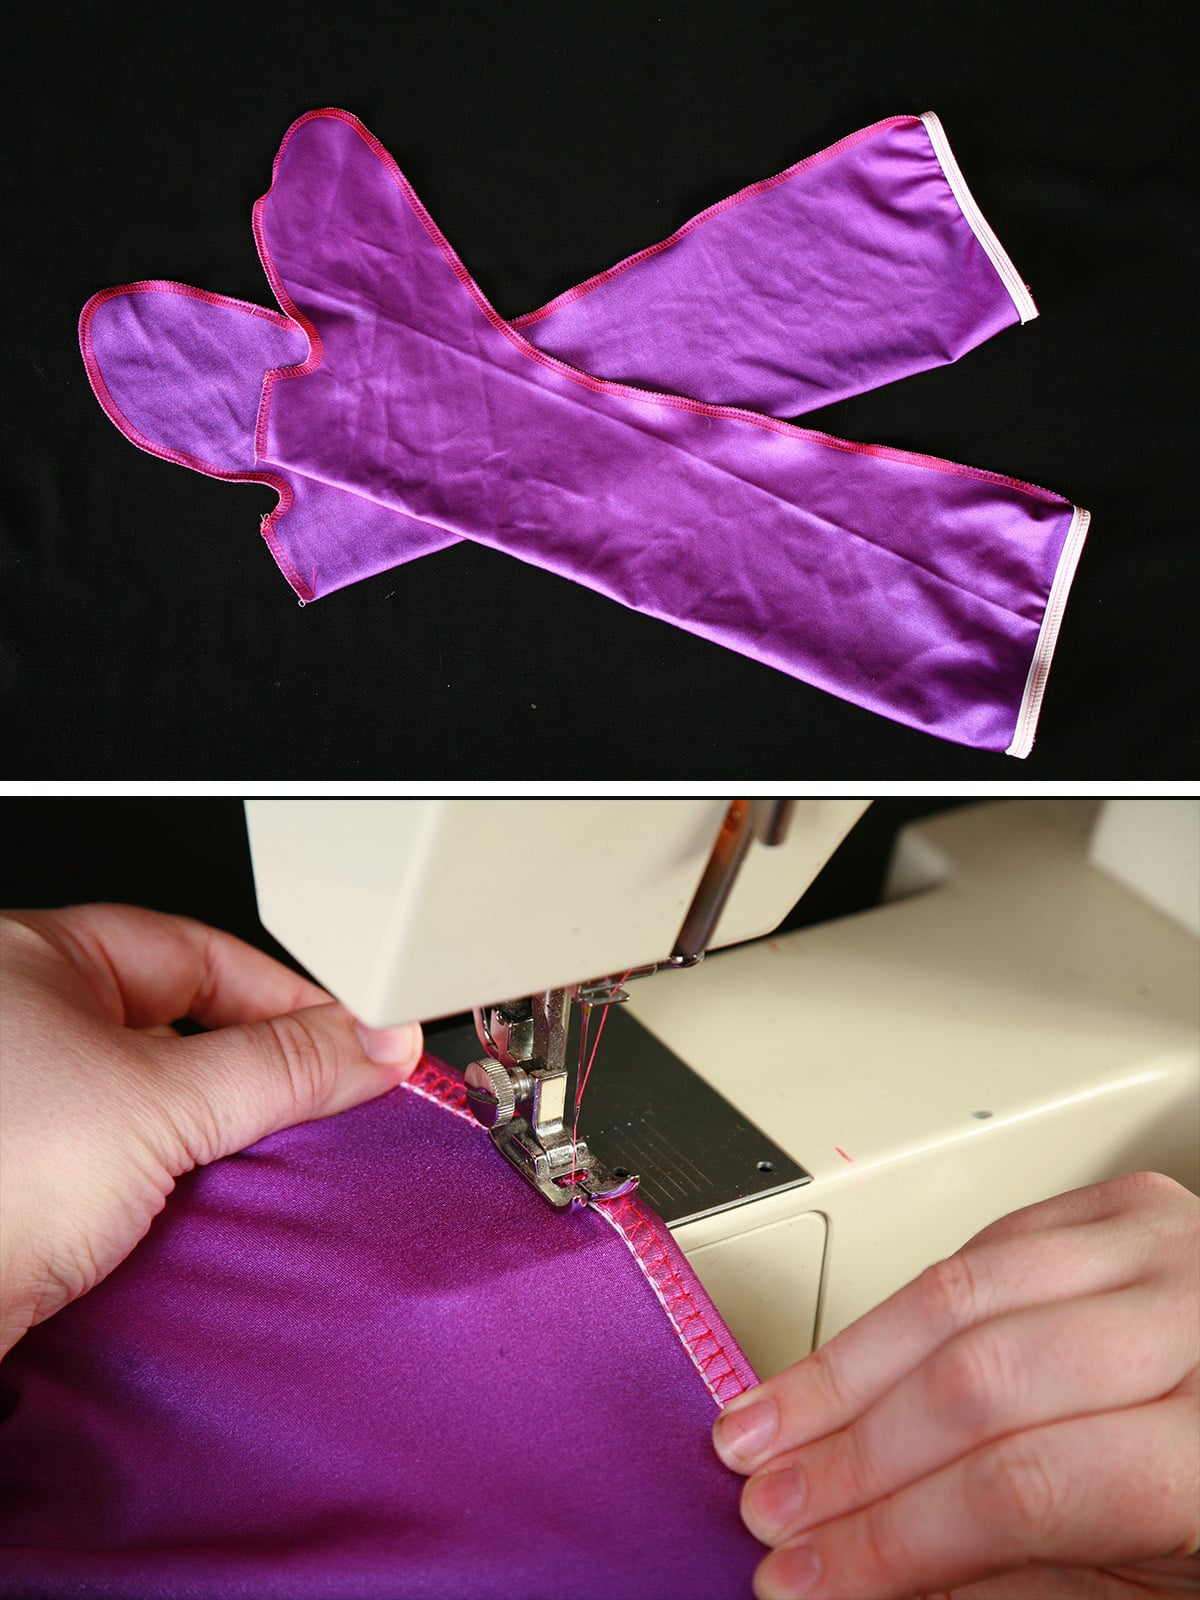 A 2 photo compilation image showing elastic being sewn into the top of a spandex boot cover.